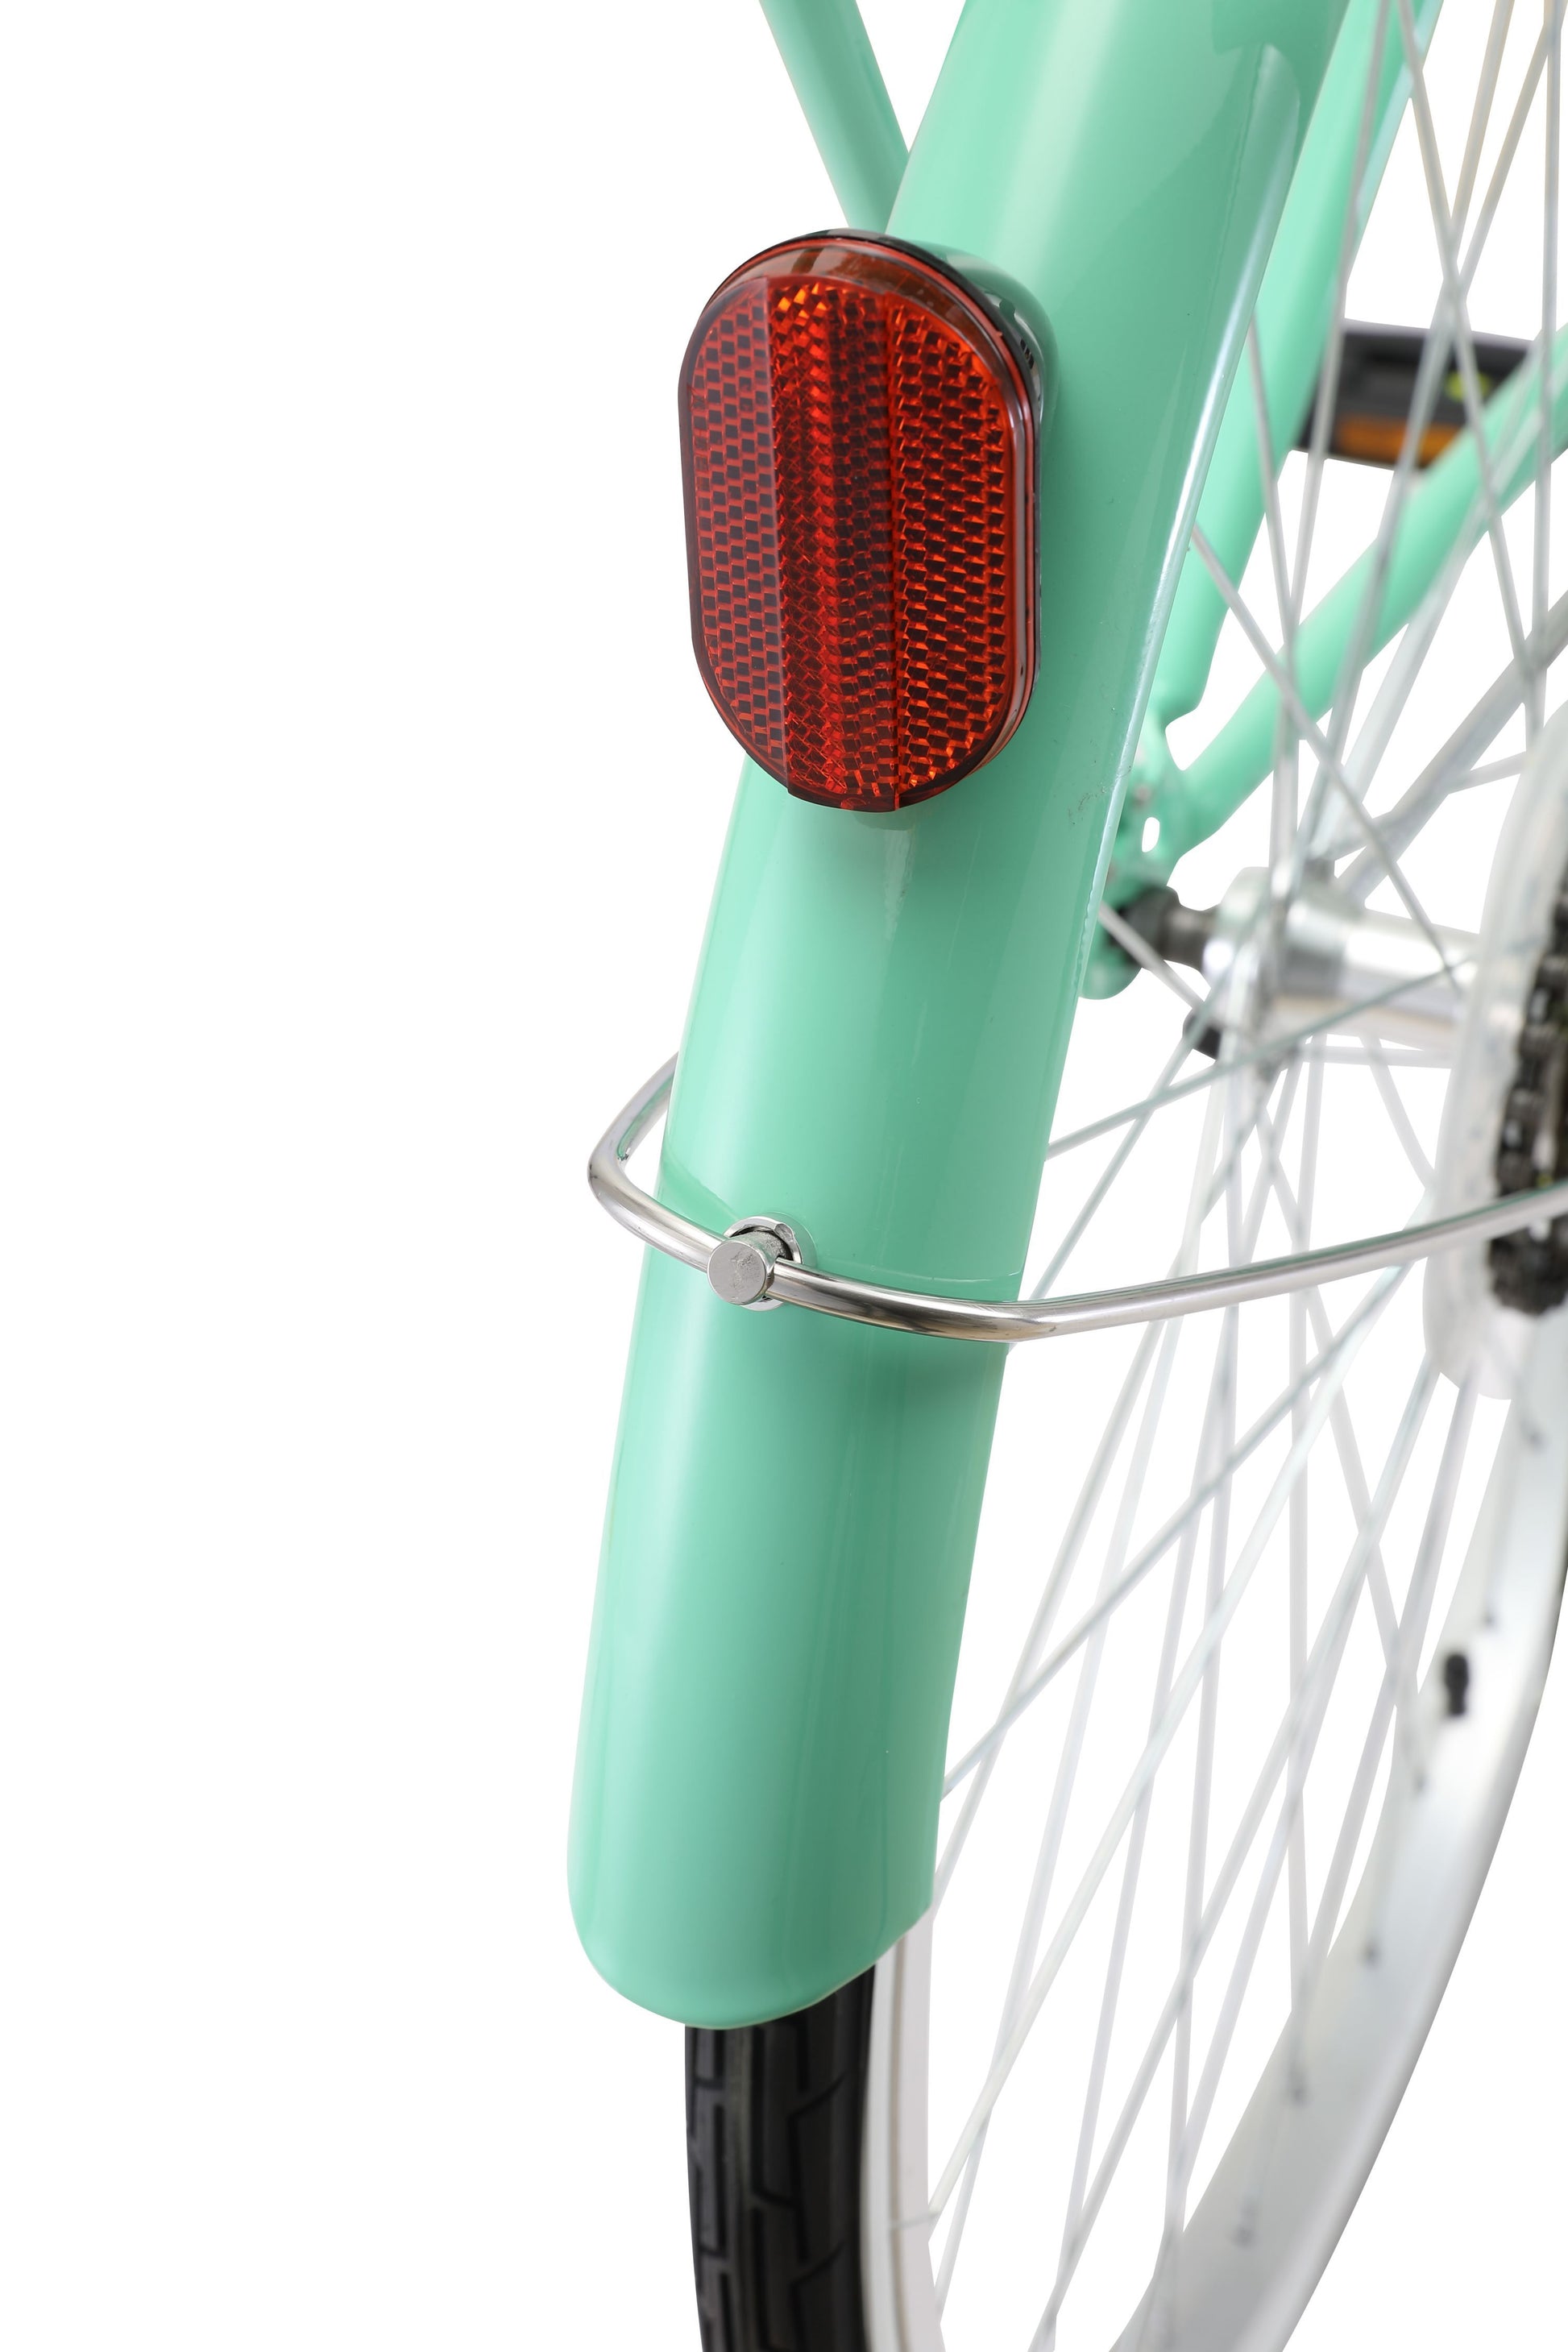 Ladies Classic Plus Vintage Bike in Mint Green showing rear mudguard with red reflector from Reid Cycles Australia